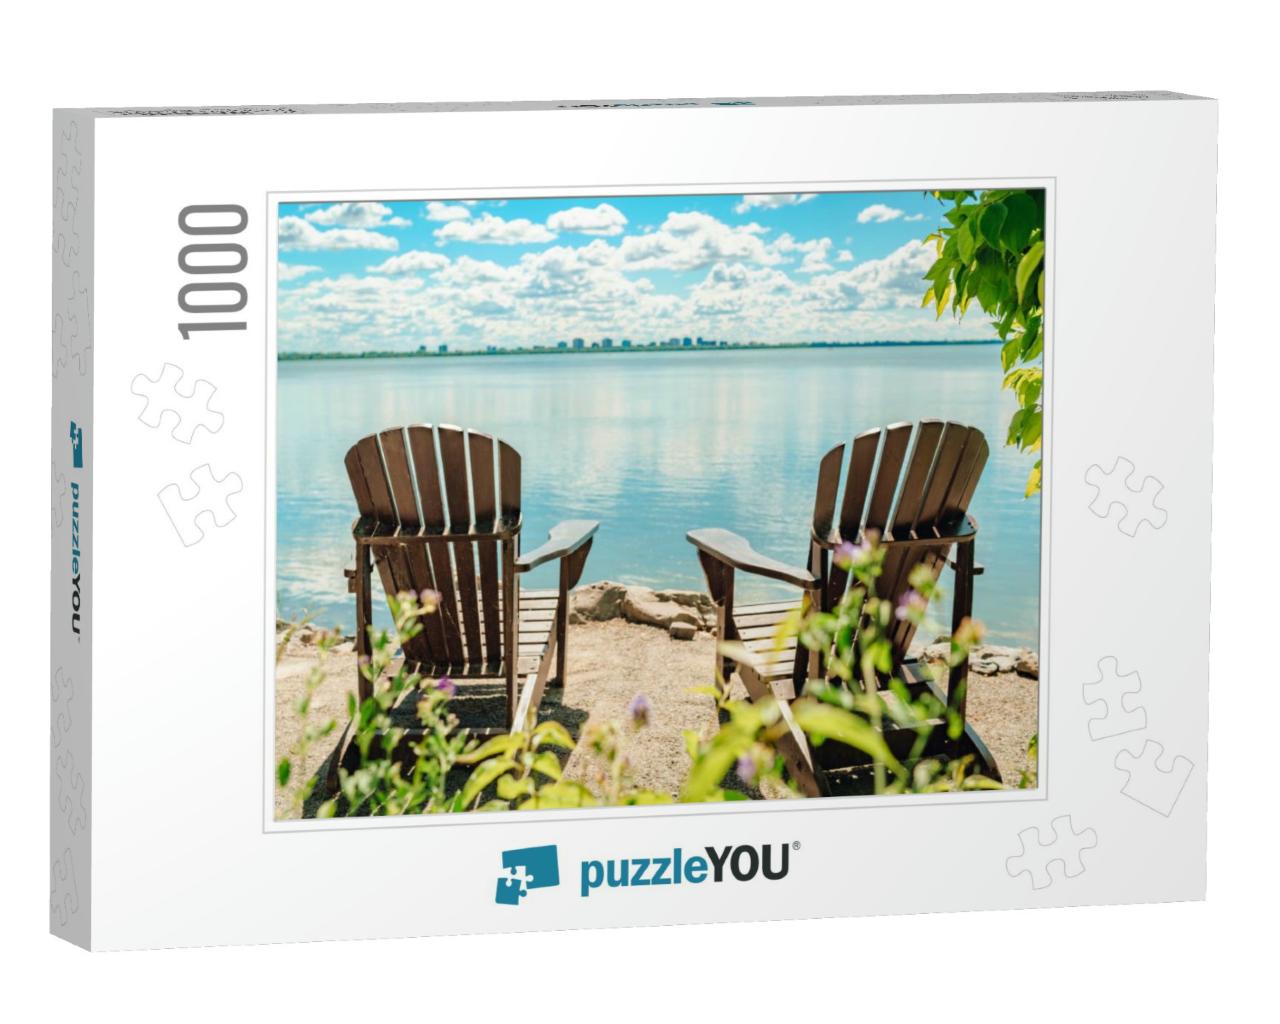 Two Muskoka Chairs by the Water on Home Terrace with Calm... Jigsaw Puzzle with 1000 pieces